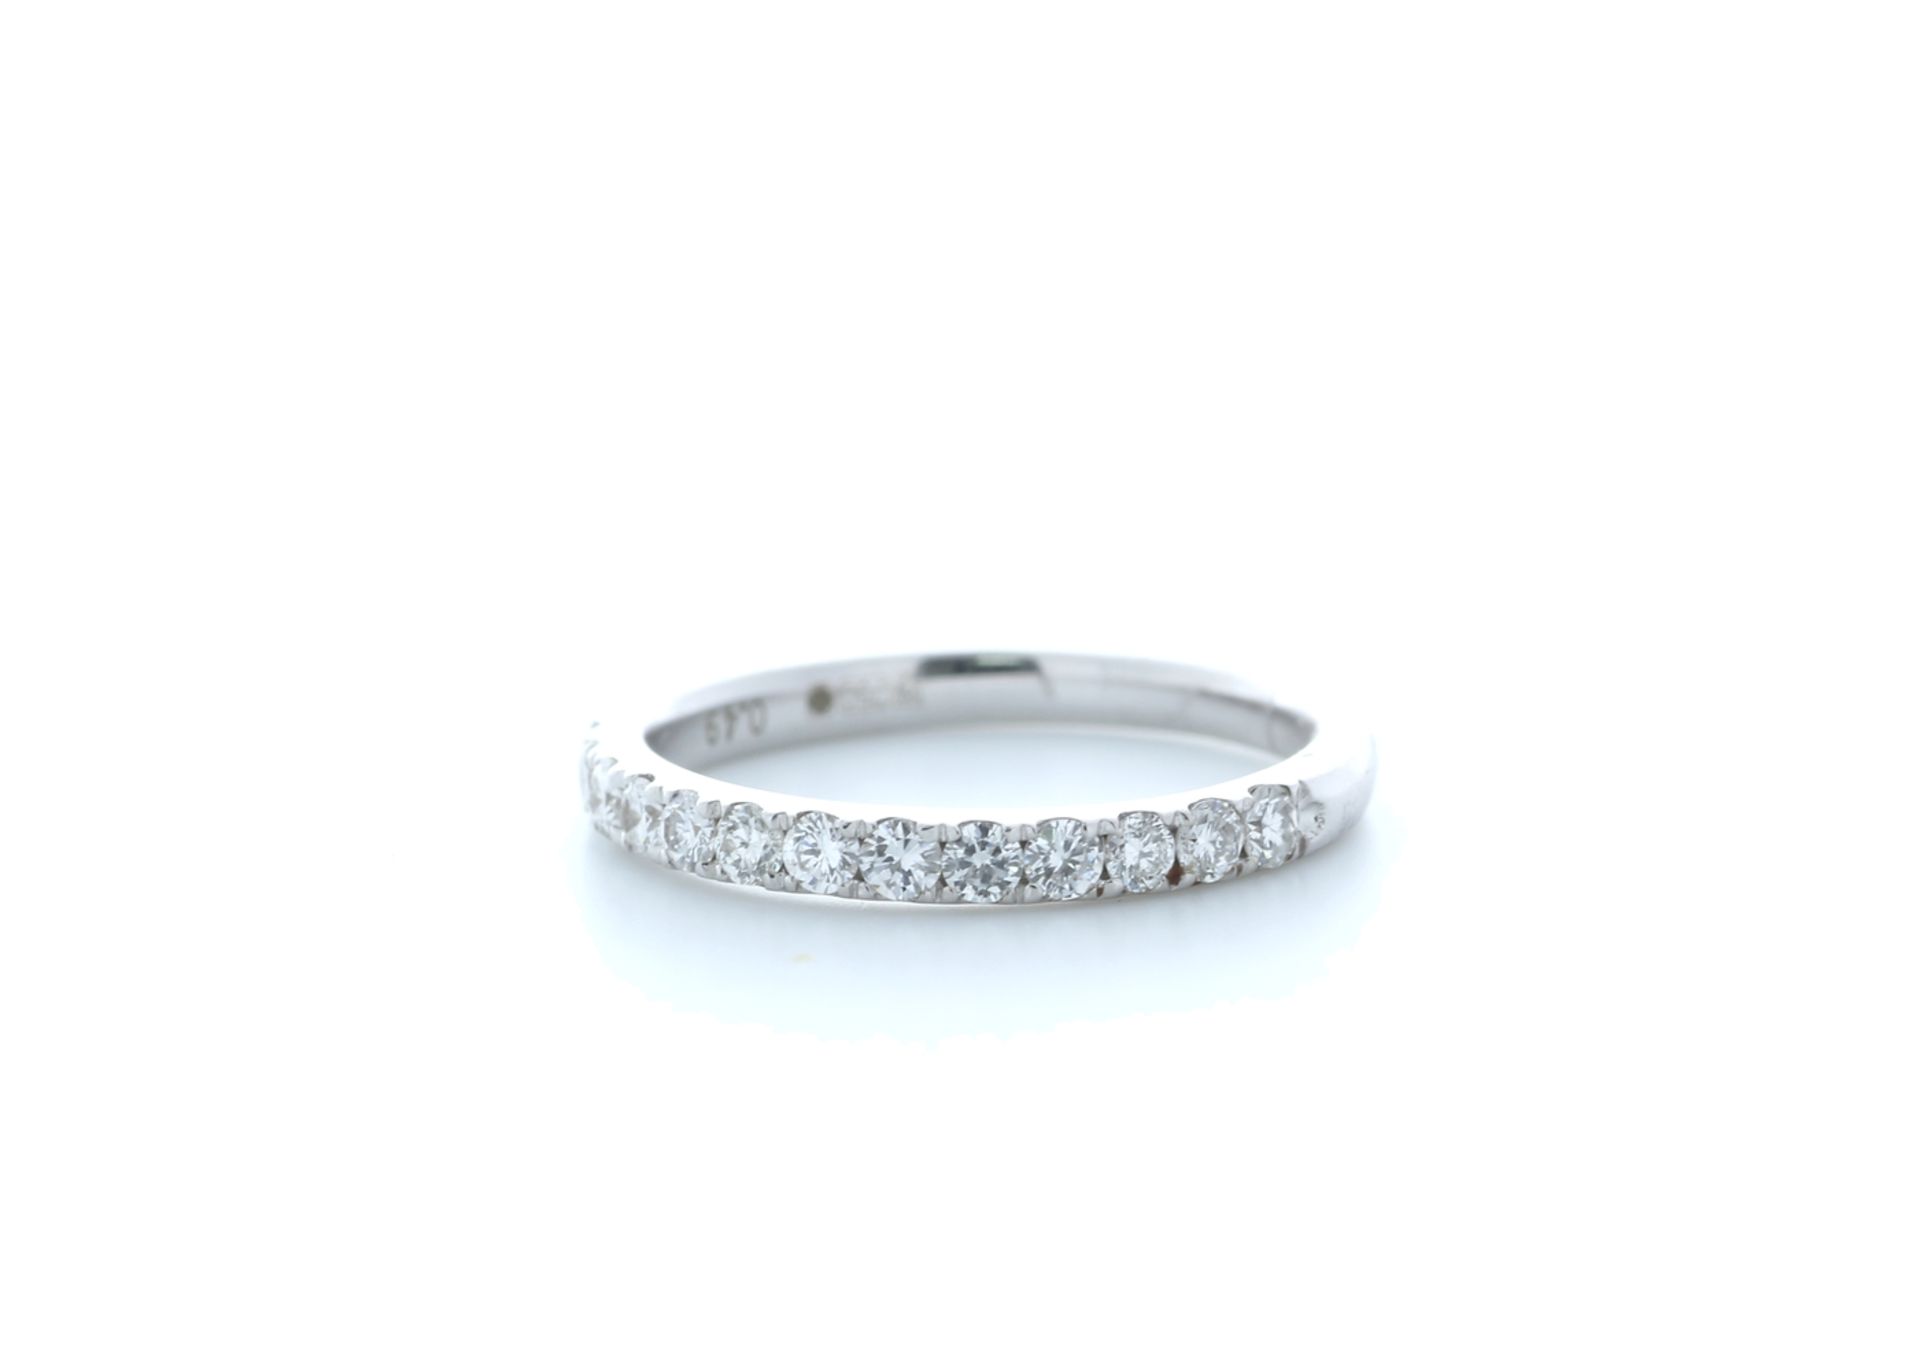 18ct White Gold Claw Set Semi Eternity Diamond Ring 0.32 Carats - Valued by IDI £2,750.00 - 18ct - Image 2 of 4